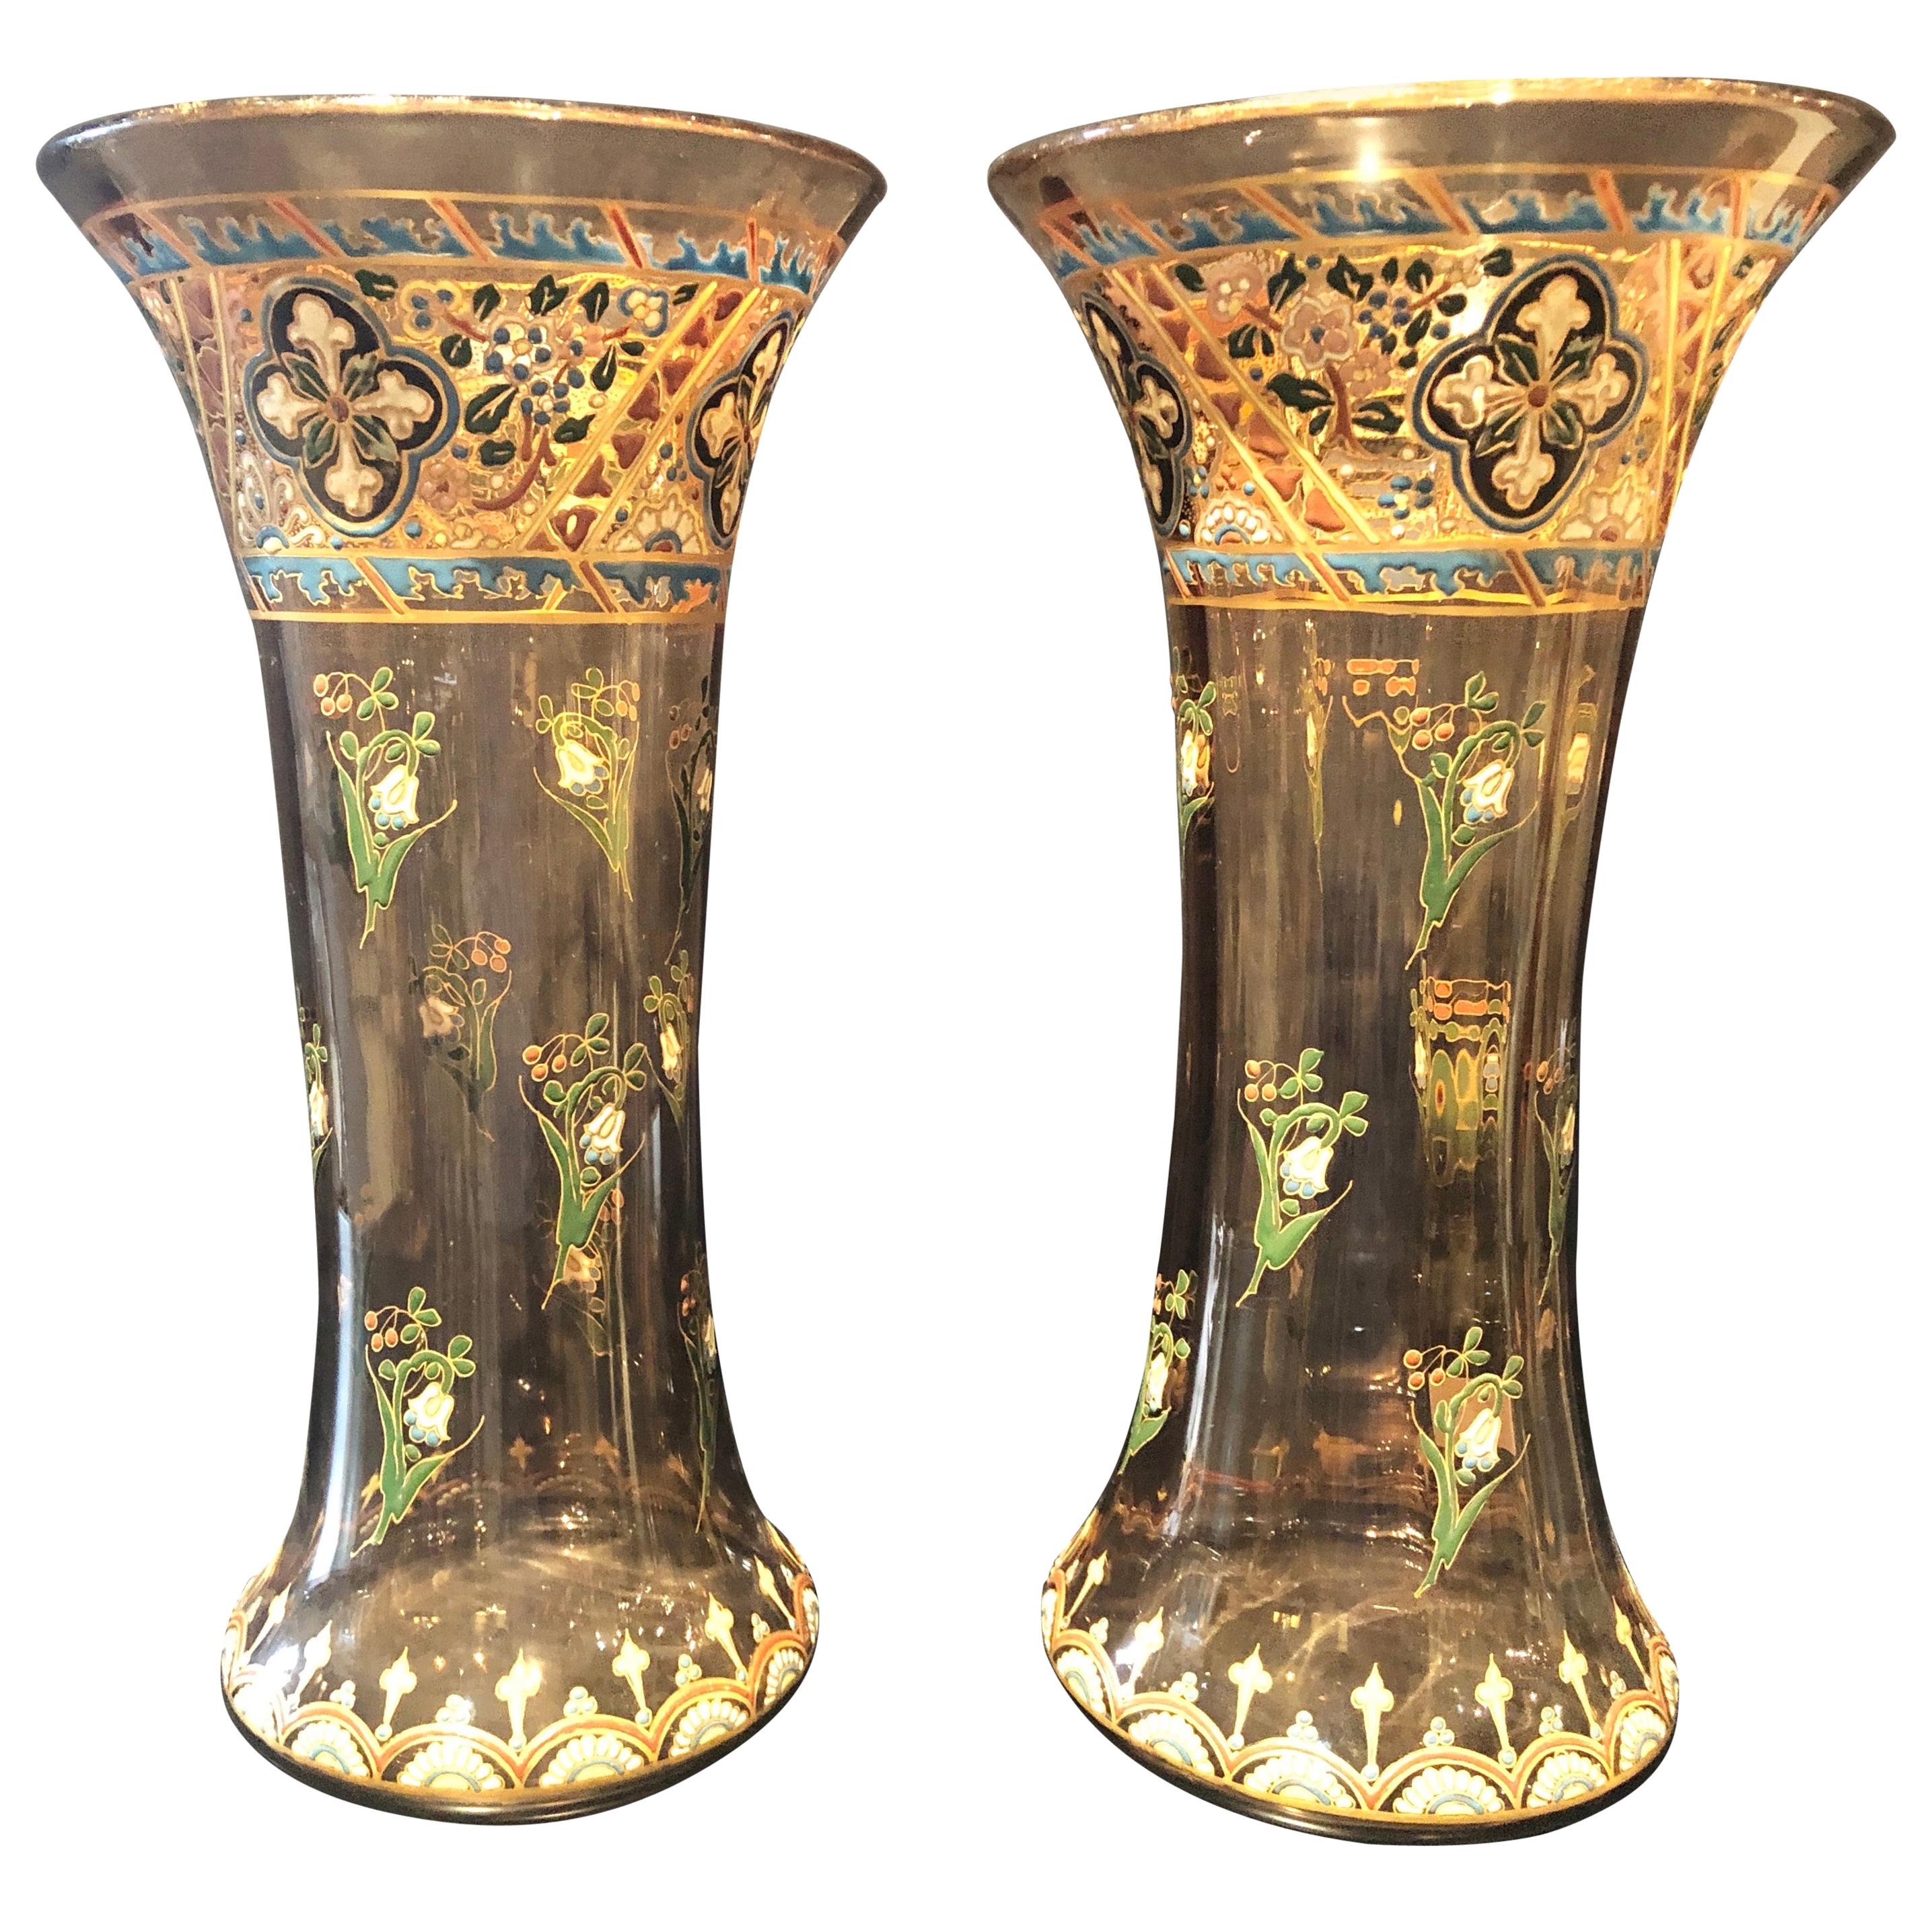 Pair of Antique Palatial French Jeweled Vases or Urns Emile Galle Style 